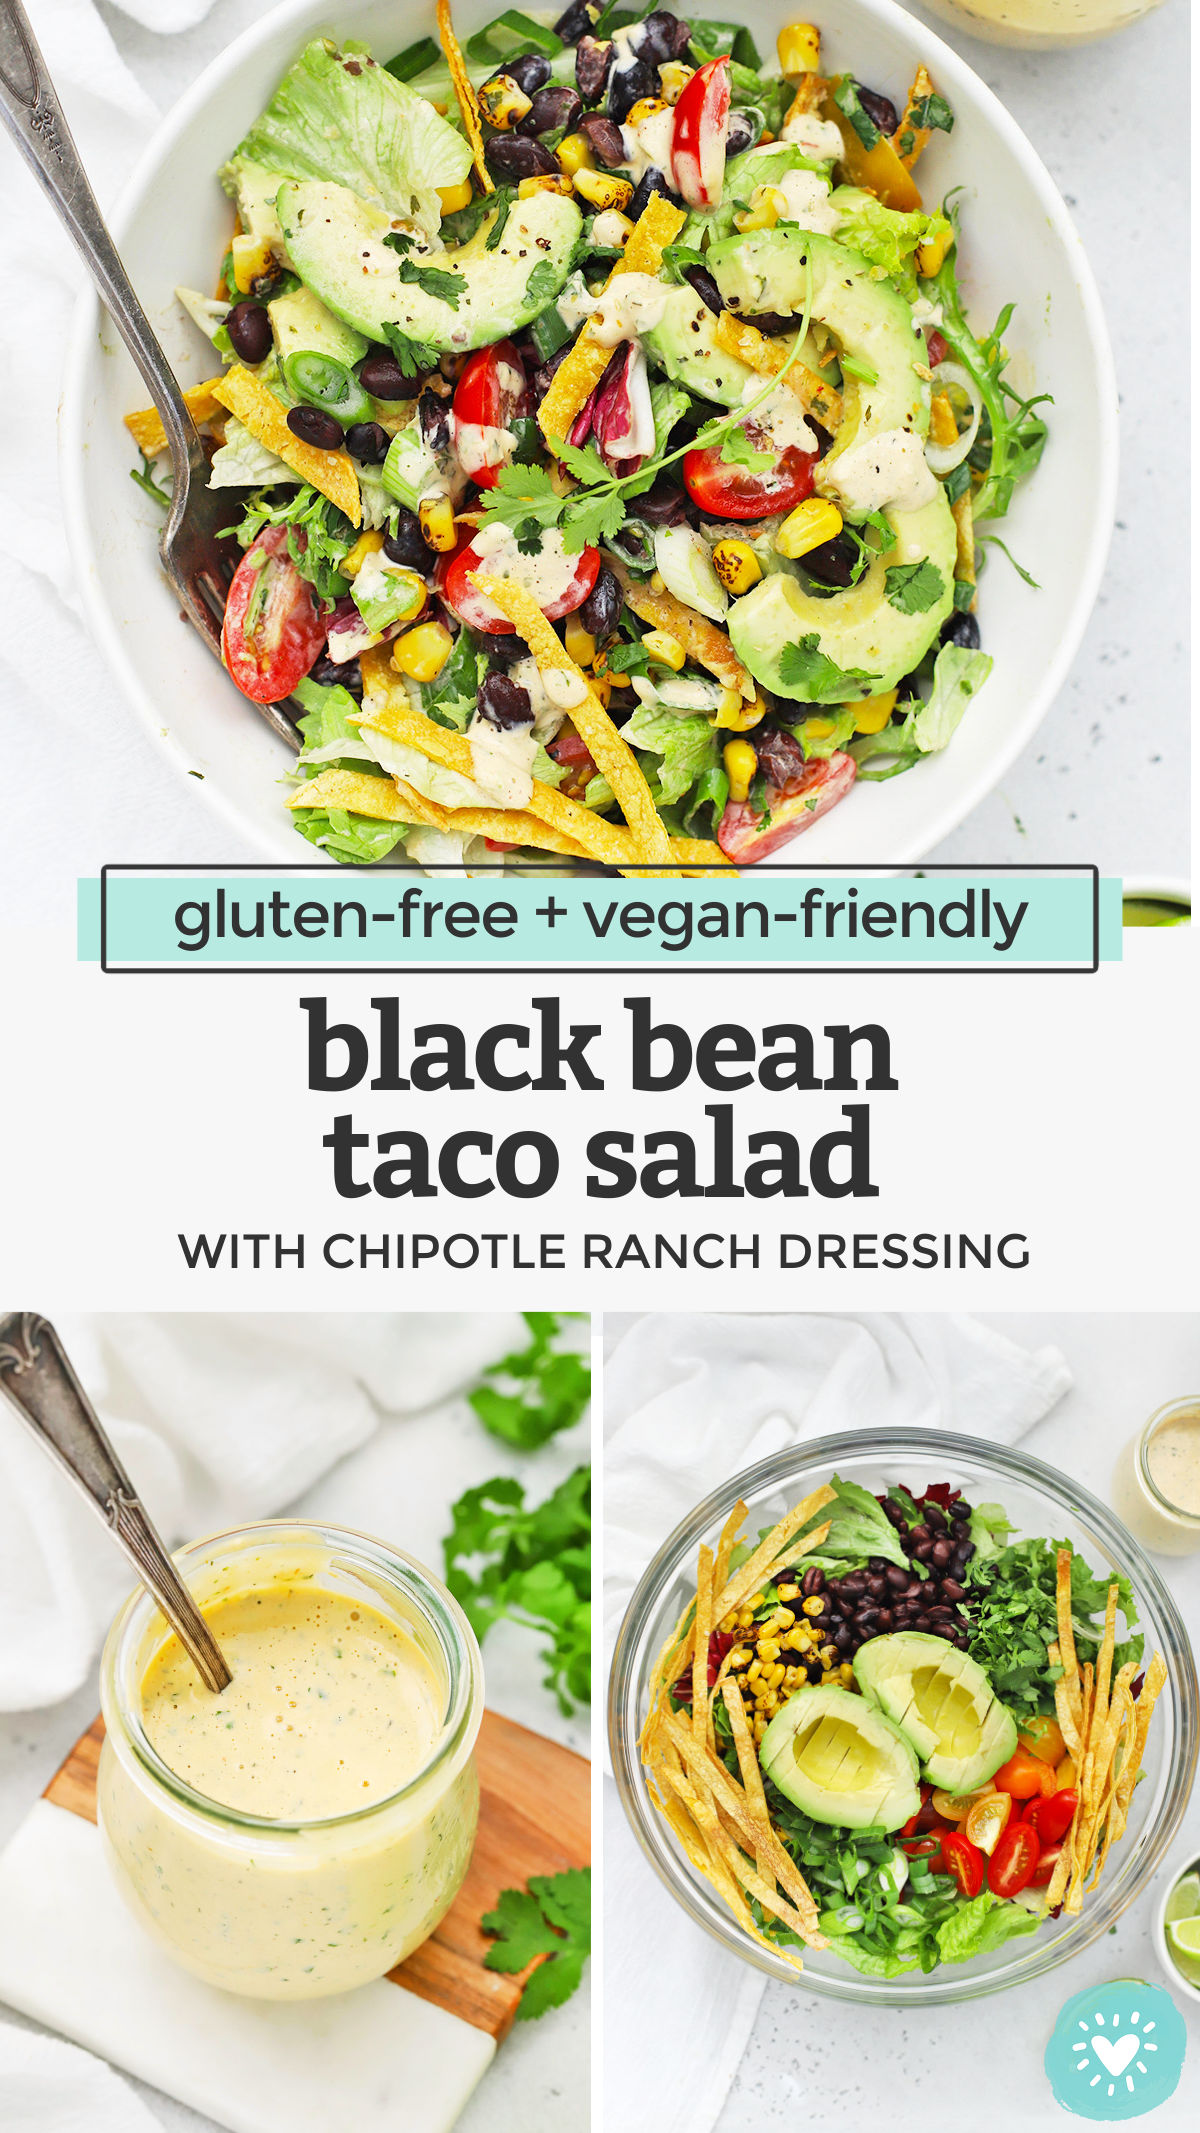 Black Bean Taco Salad - A gorgeous vegetarian taco salad with colorful veggies and a creamy dressing that'll keep you coming back for more! (Gluten-Free, Vegan-Friendly) // Vegan Taco Salad // Meatless Monday // Vegan Dinner // Healthy Dinner // Vegetarian Dinner #glutenfree #vegan #tacosalad #vegetarian #healthydinner